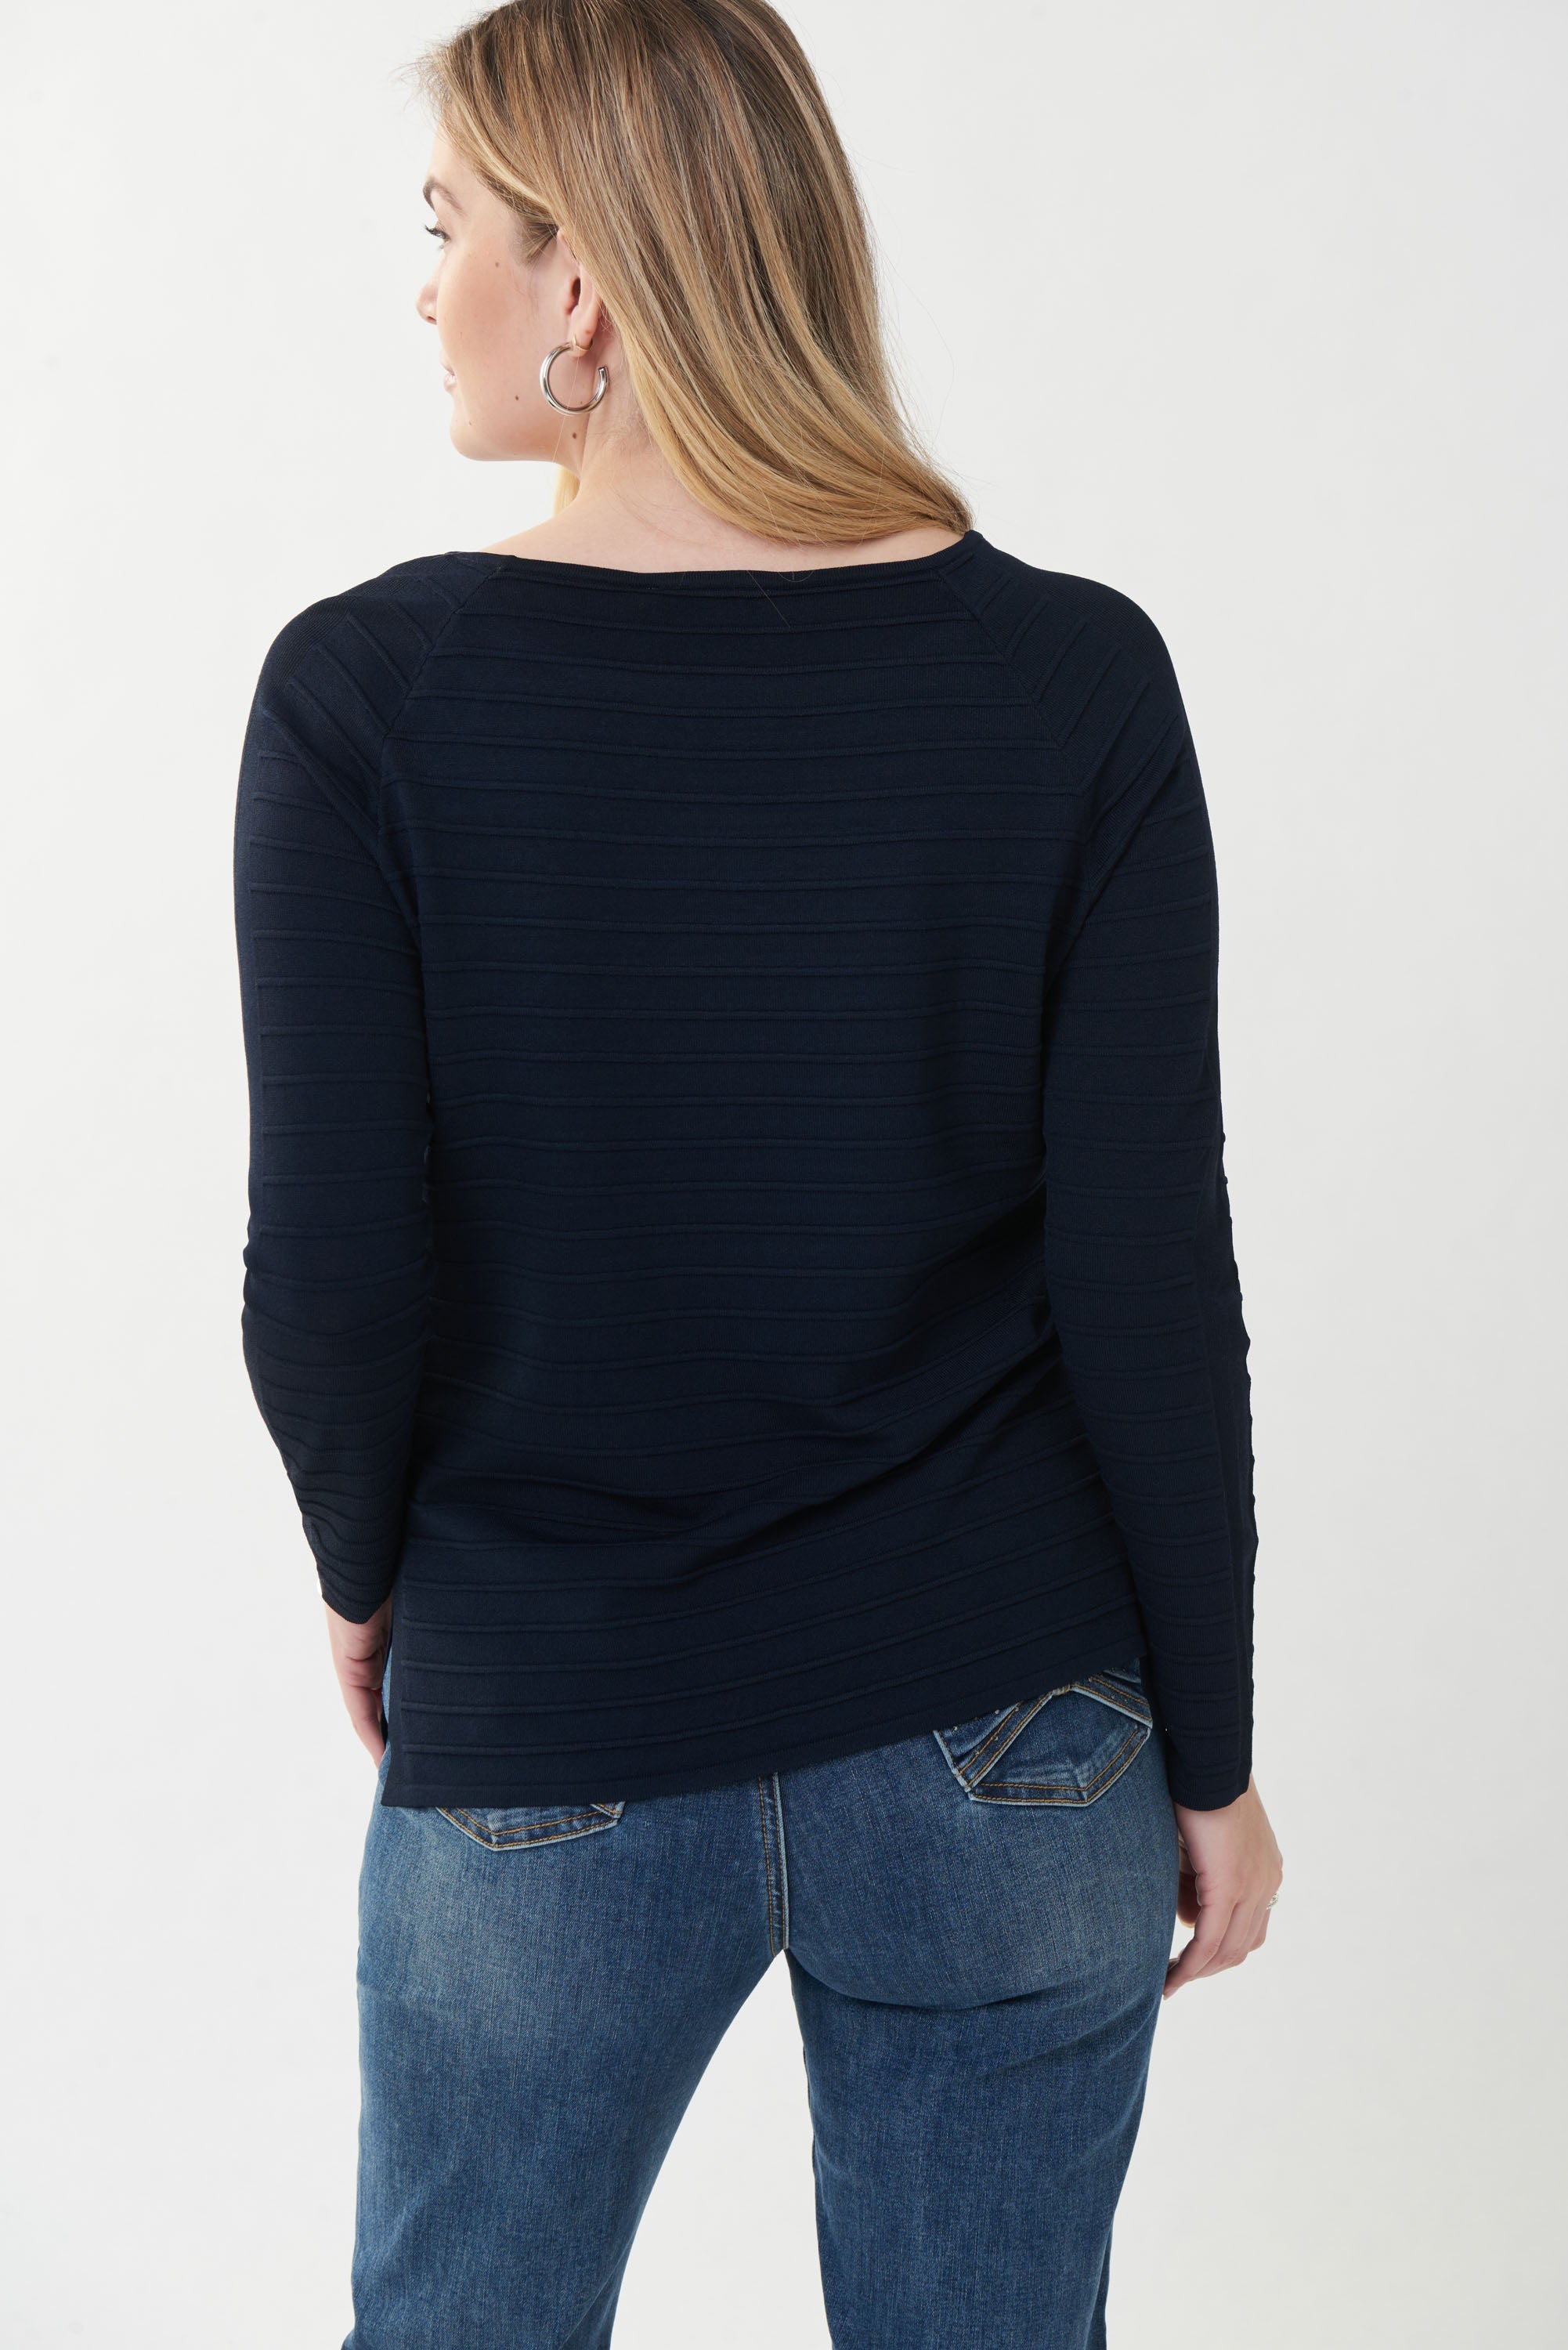 JOSEPH RIBKOFF - Cowl Neck Sweater With Large Cuff - Women's Clothing & Accessories 